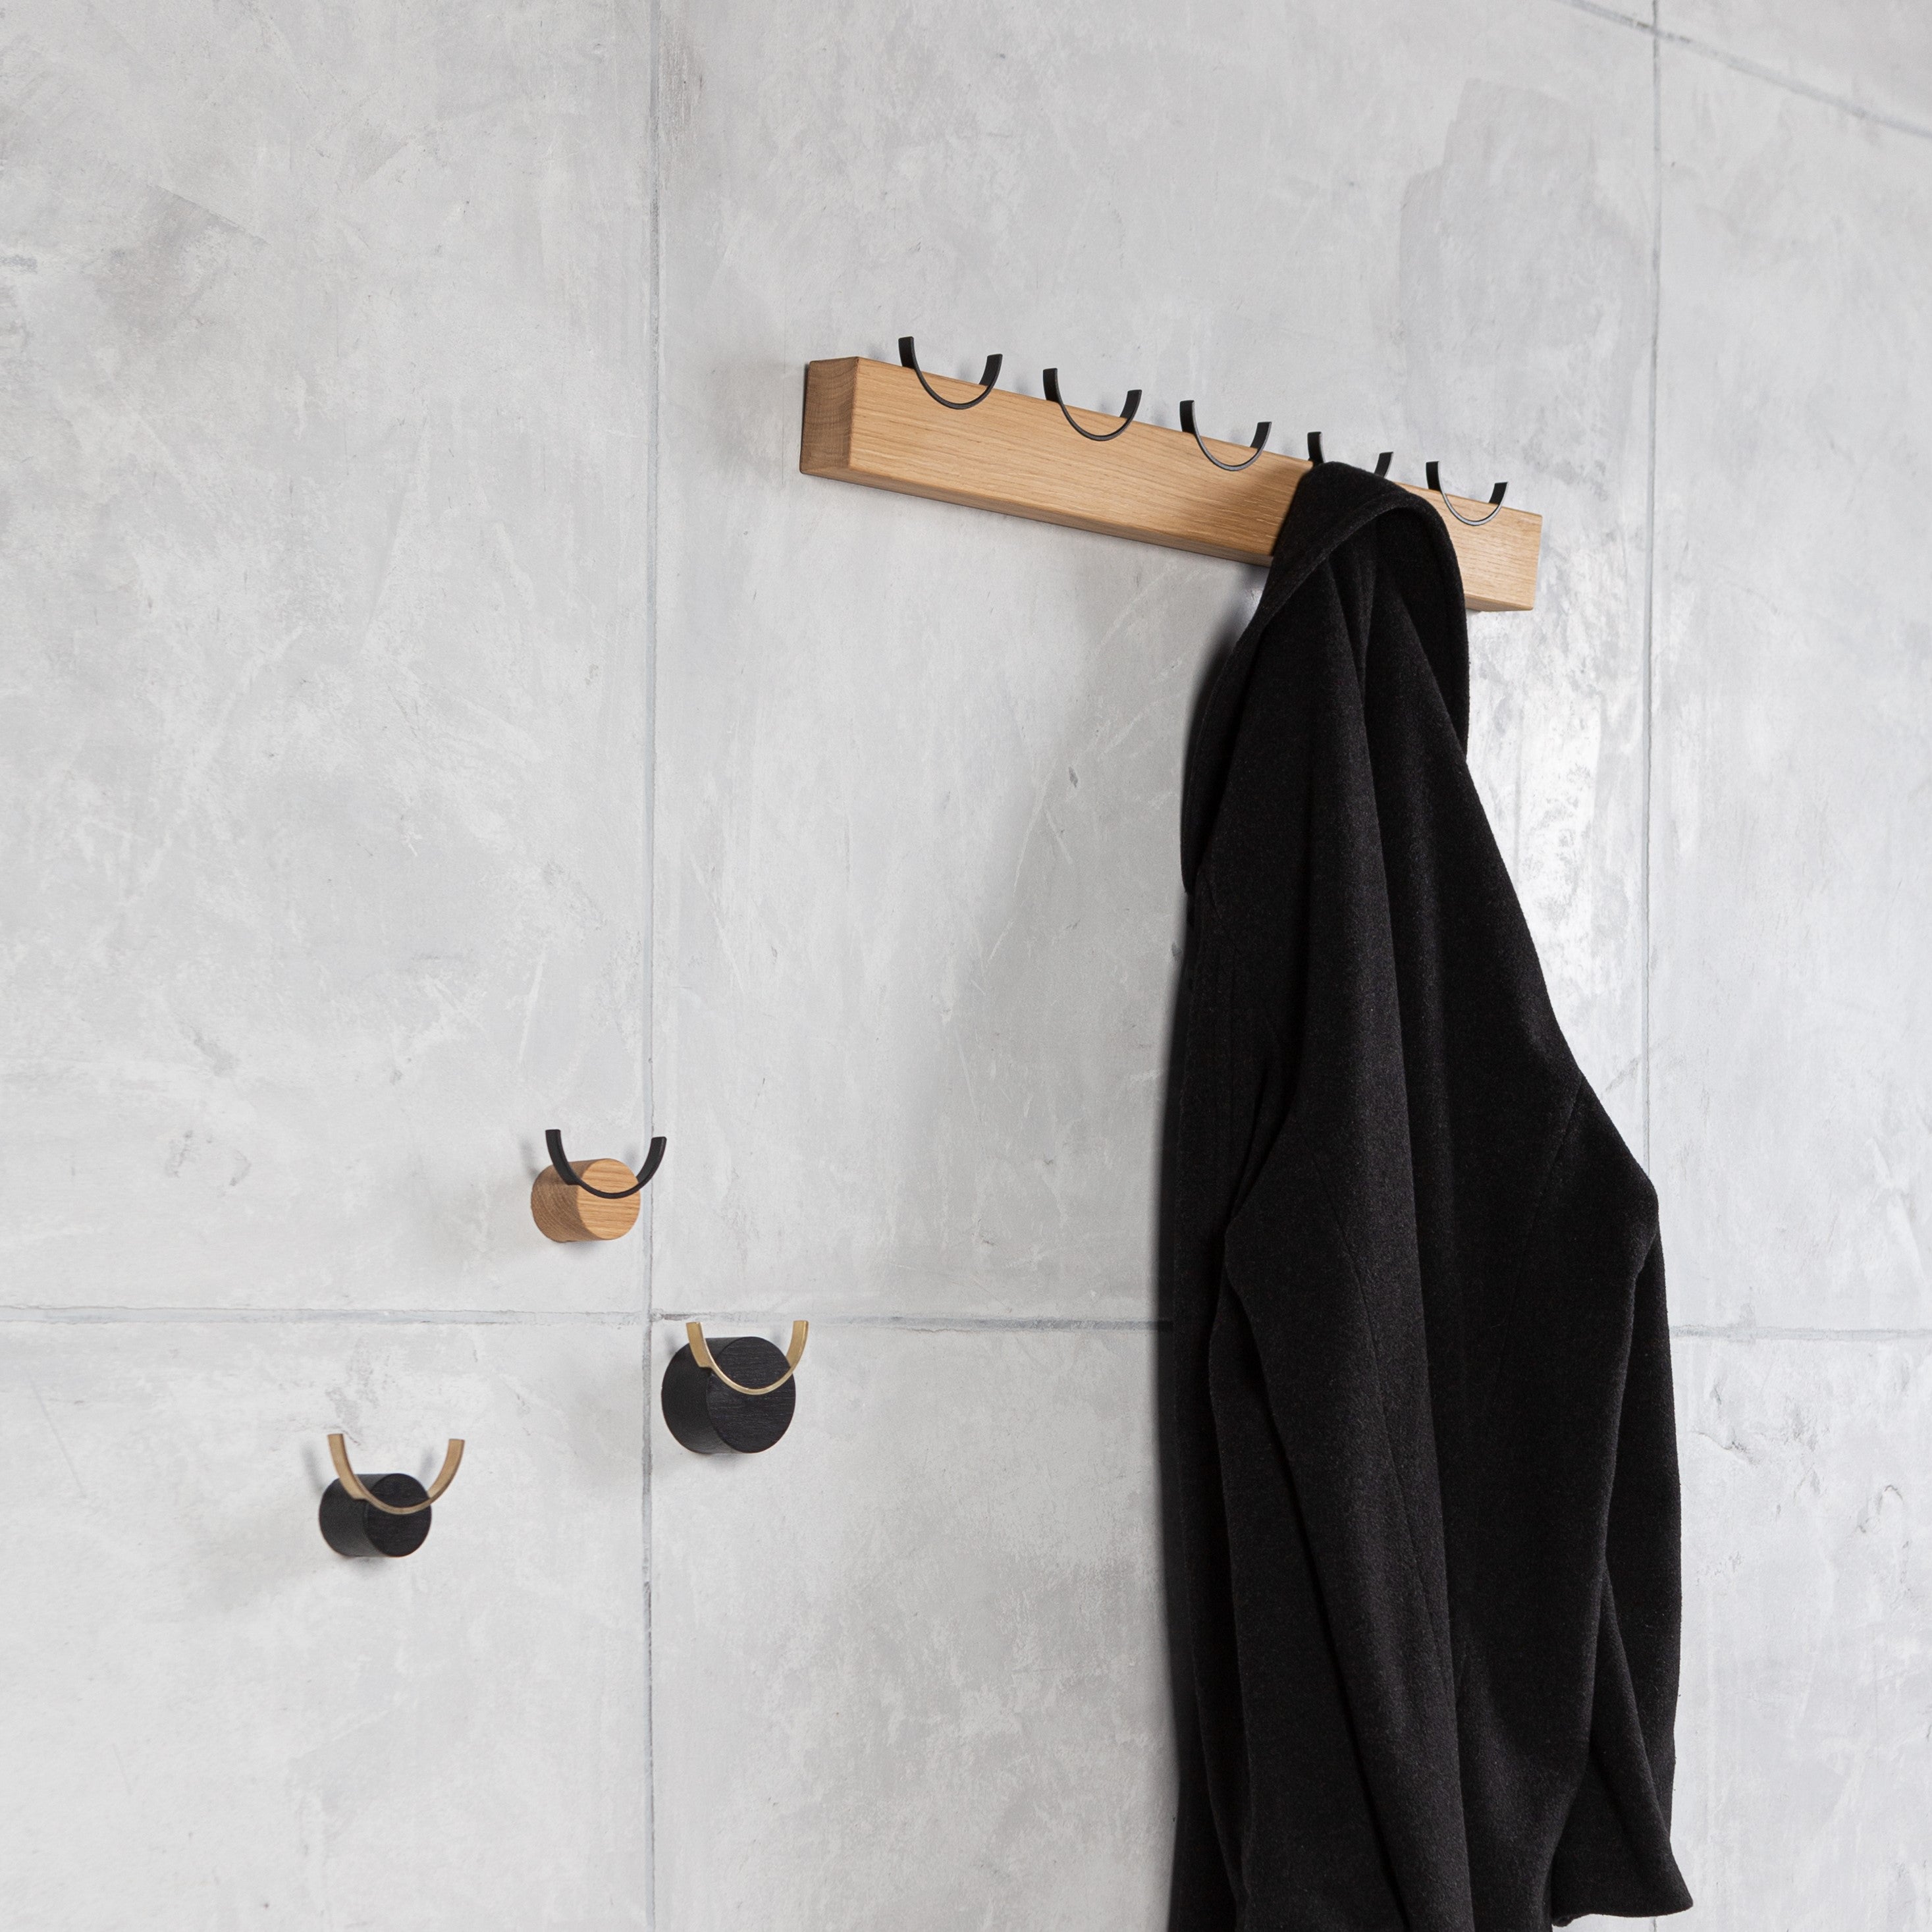 Wall hook and coat rack for entryway